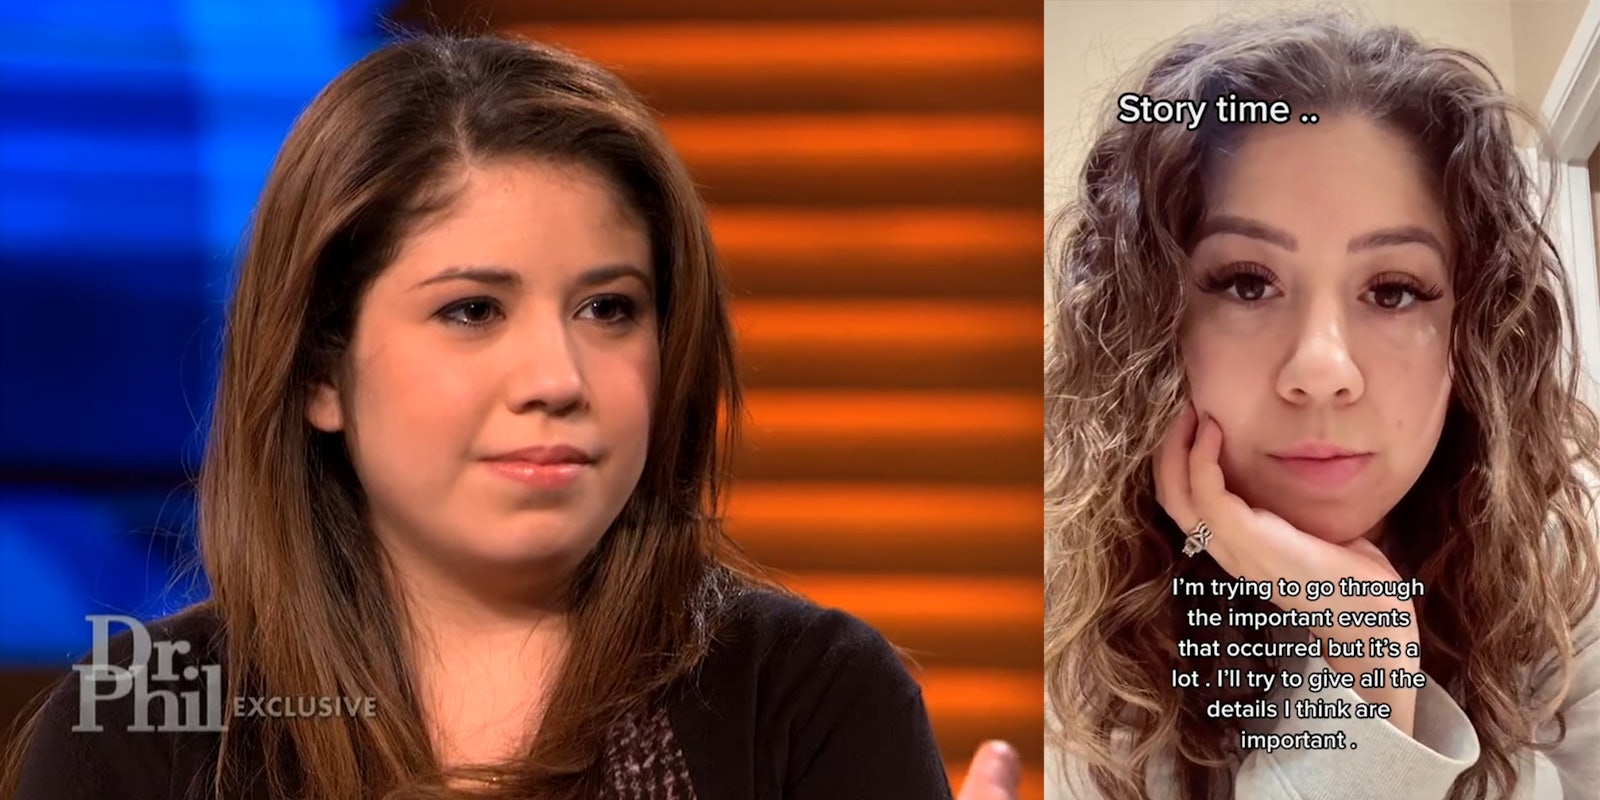 young woman on Dr Phil show (l) same young woman with caption 'Story time.. I'm trying to go through the important events that occurred but it's a lot. I'll try to give all the details I think are important.' (r)